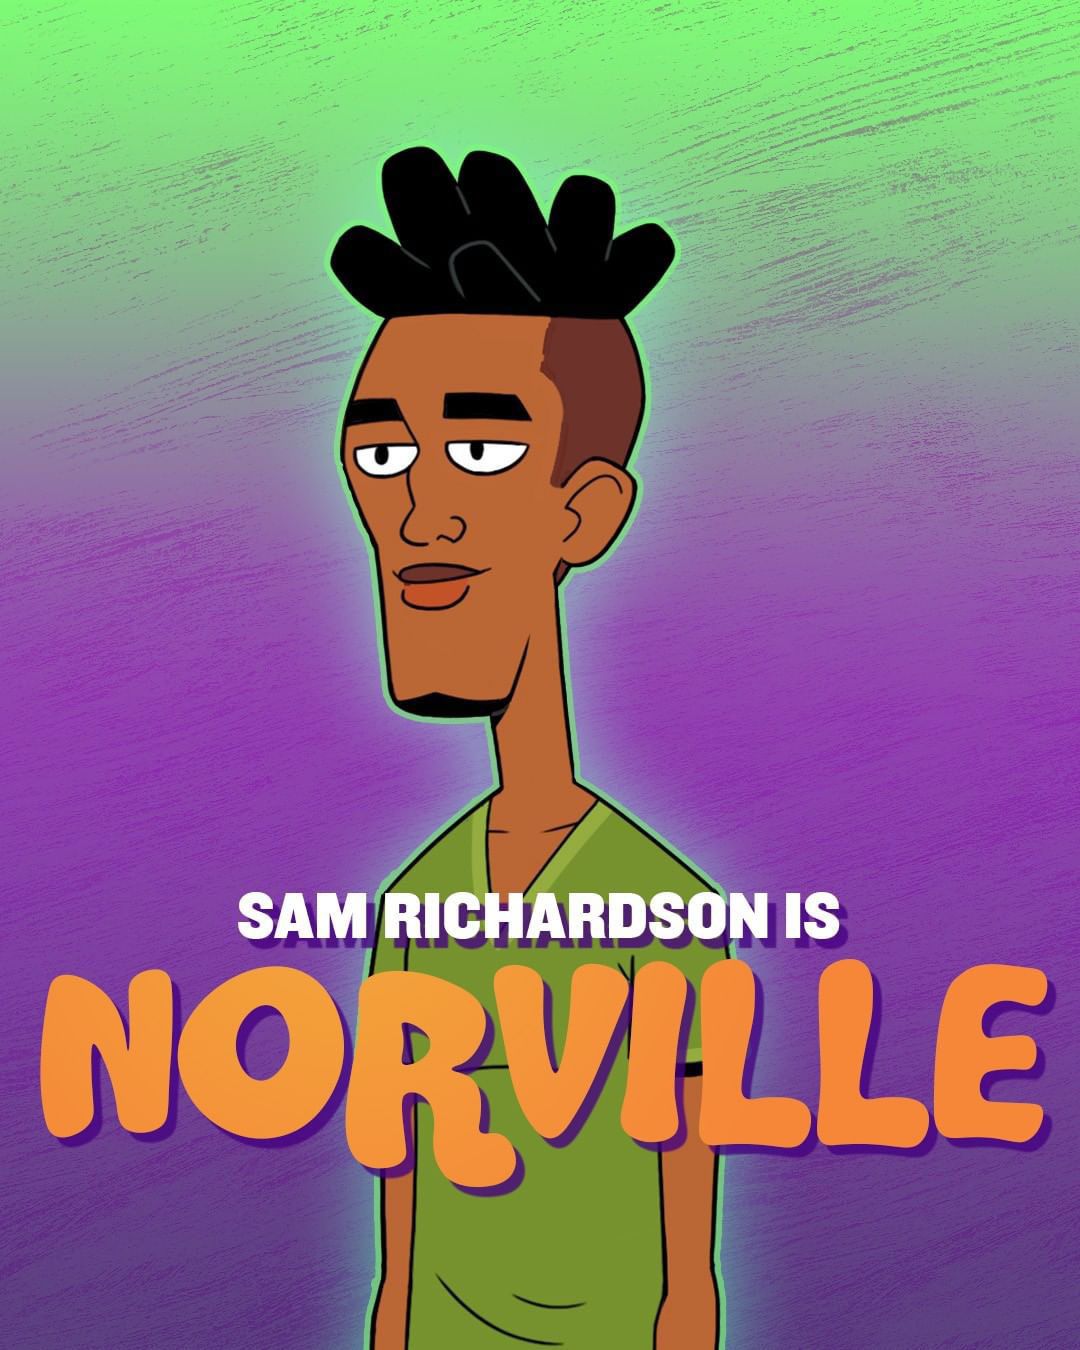 Norville aka Shaggy, a black man with spiky hair and a spirit patch, wearing a green shirt 